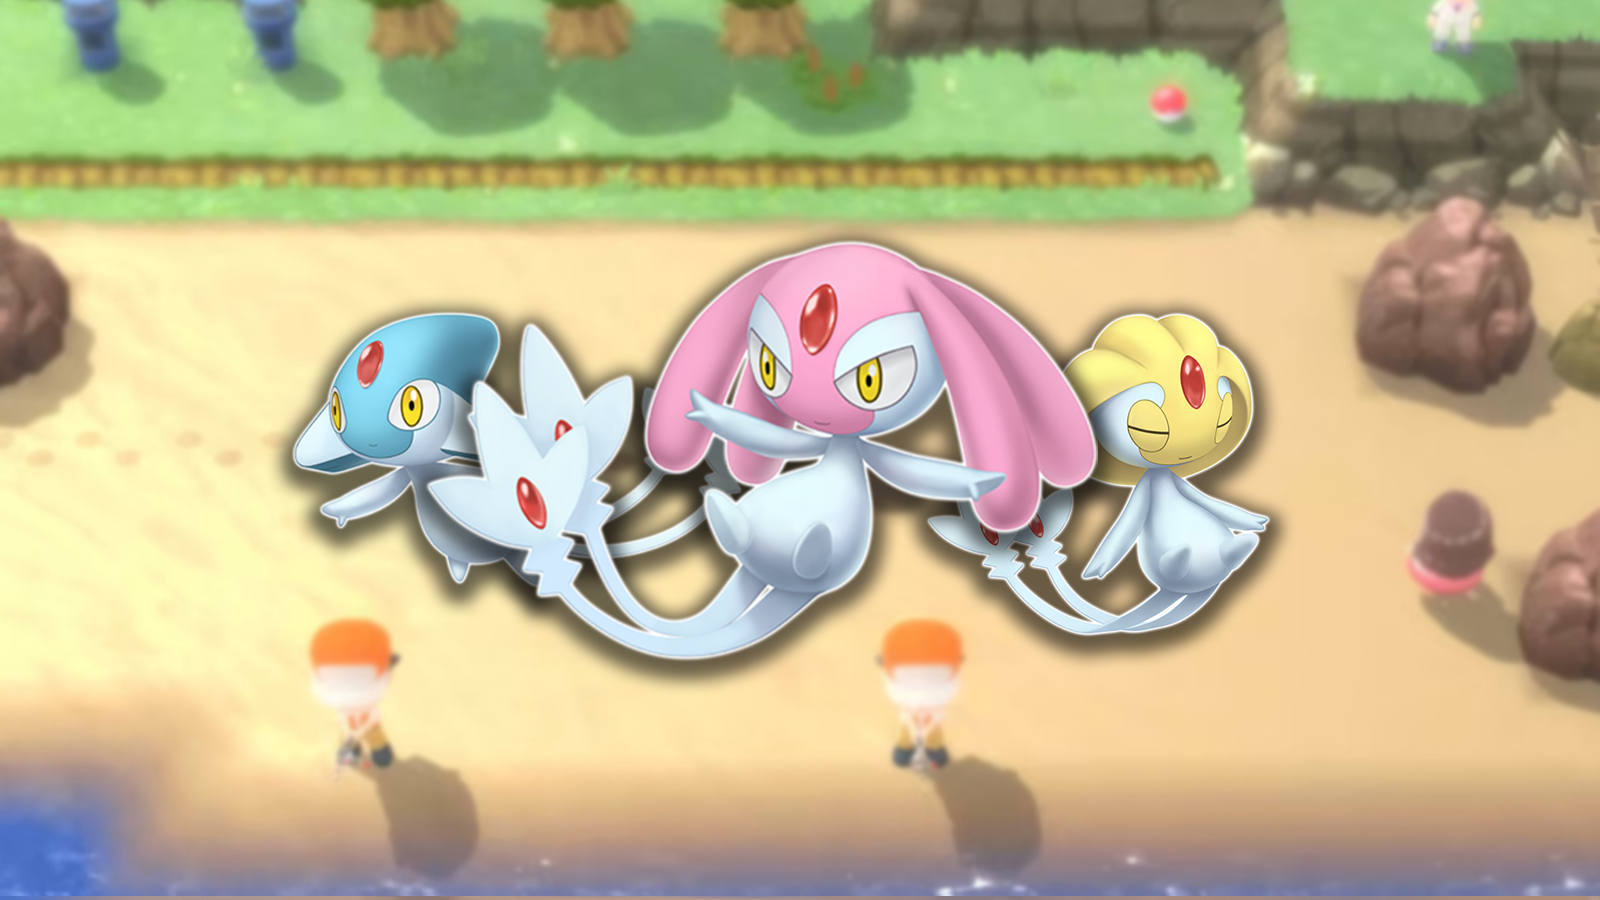 How to Get Mesprit, Uxie, and Azelf in Pokemon Brilliant Diamond and  Shining Pearl - KeenGamer